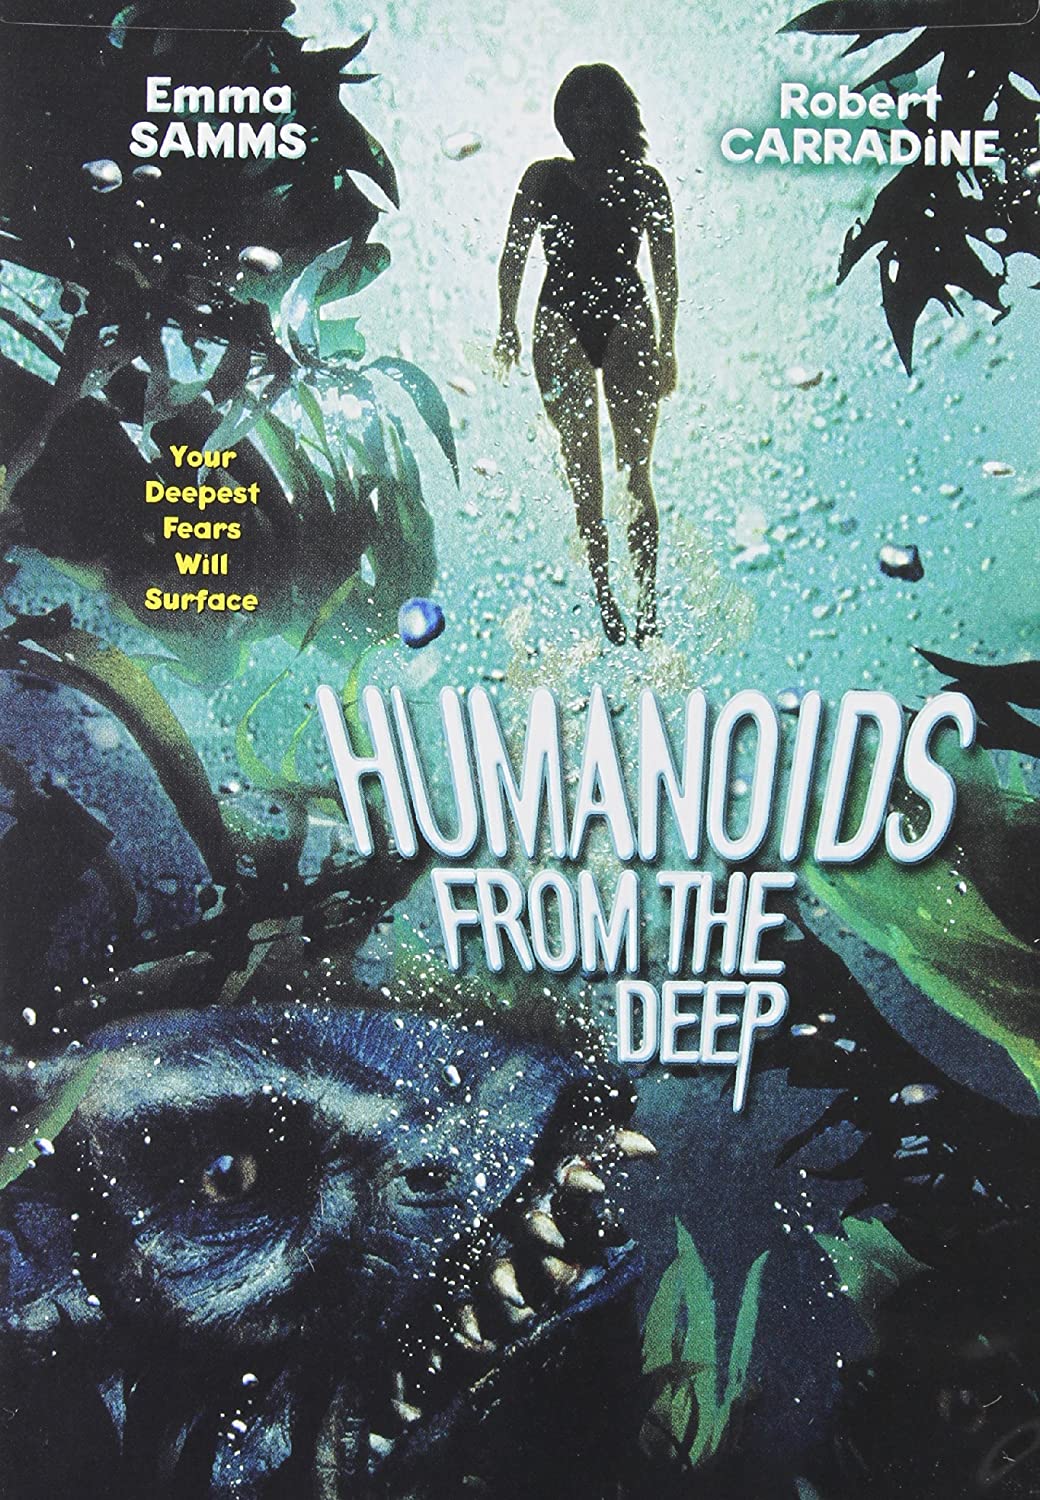 Humannoids of the Deep - 1996